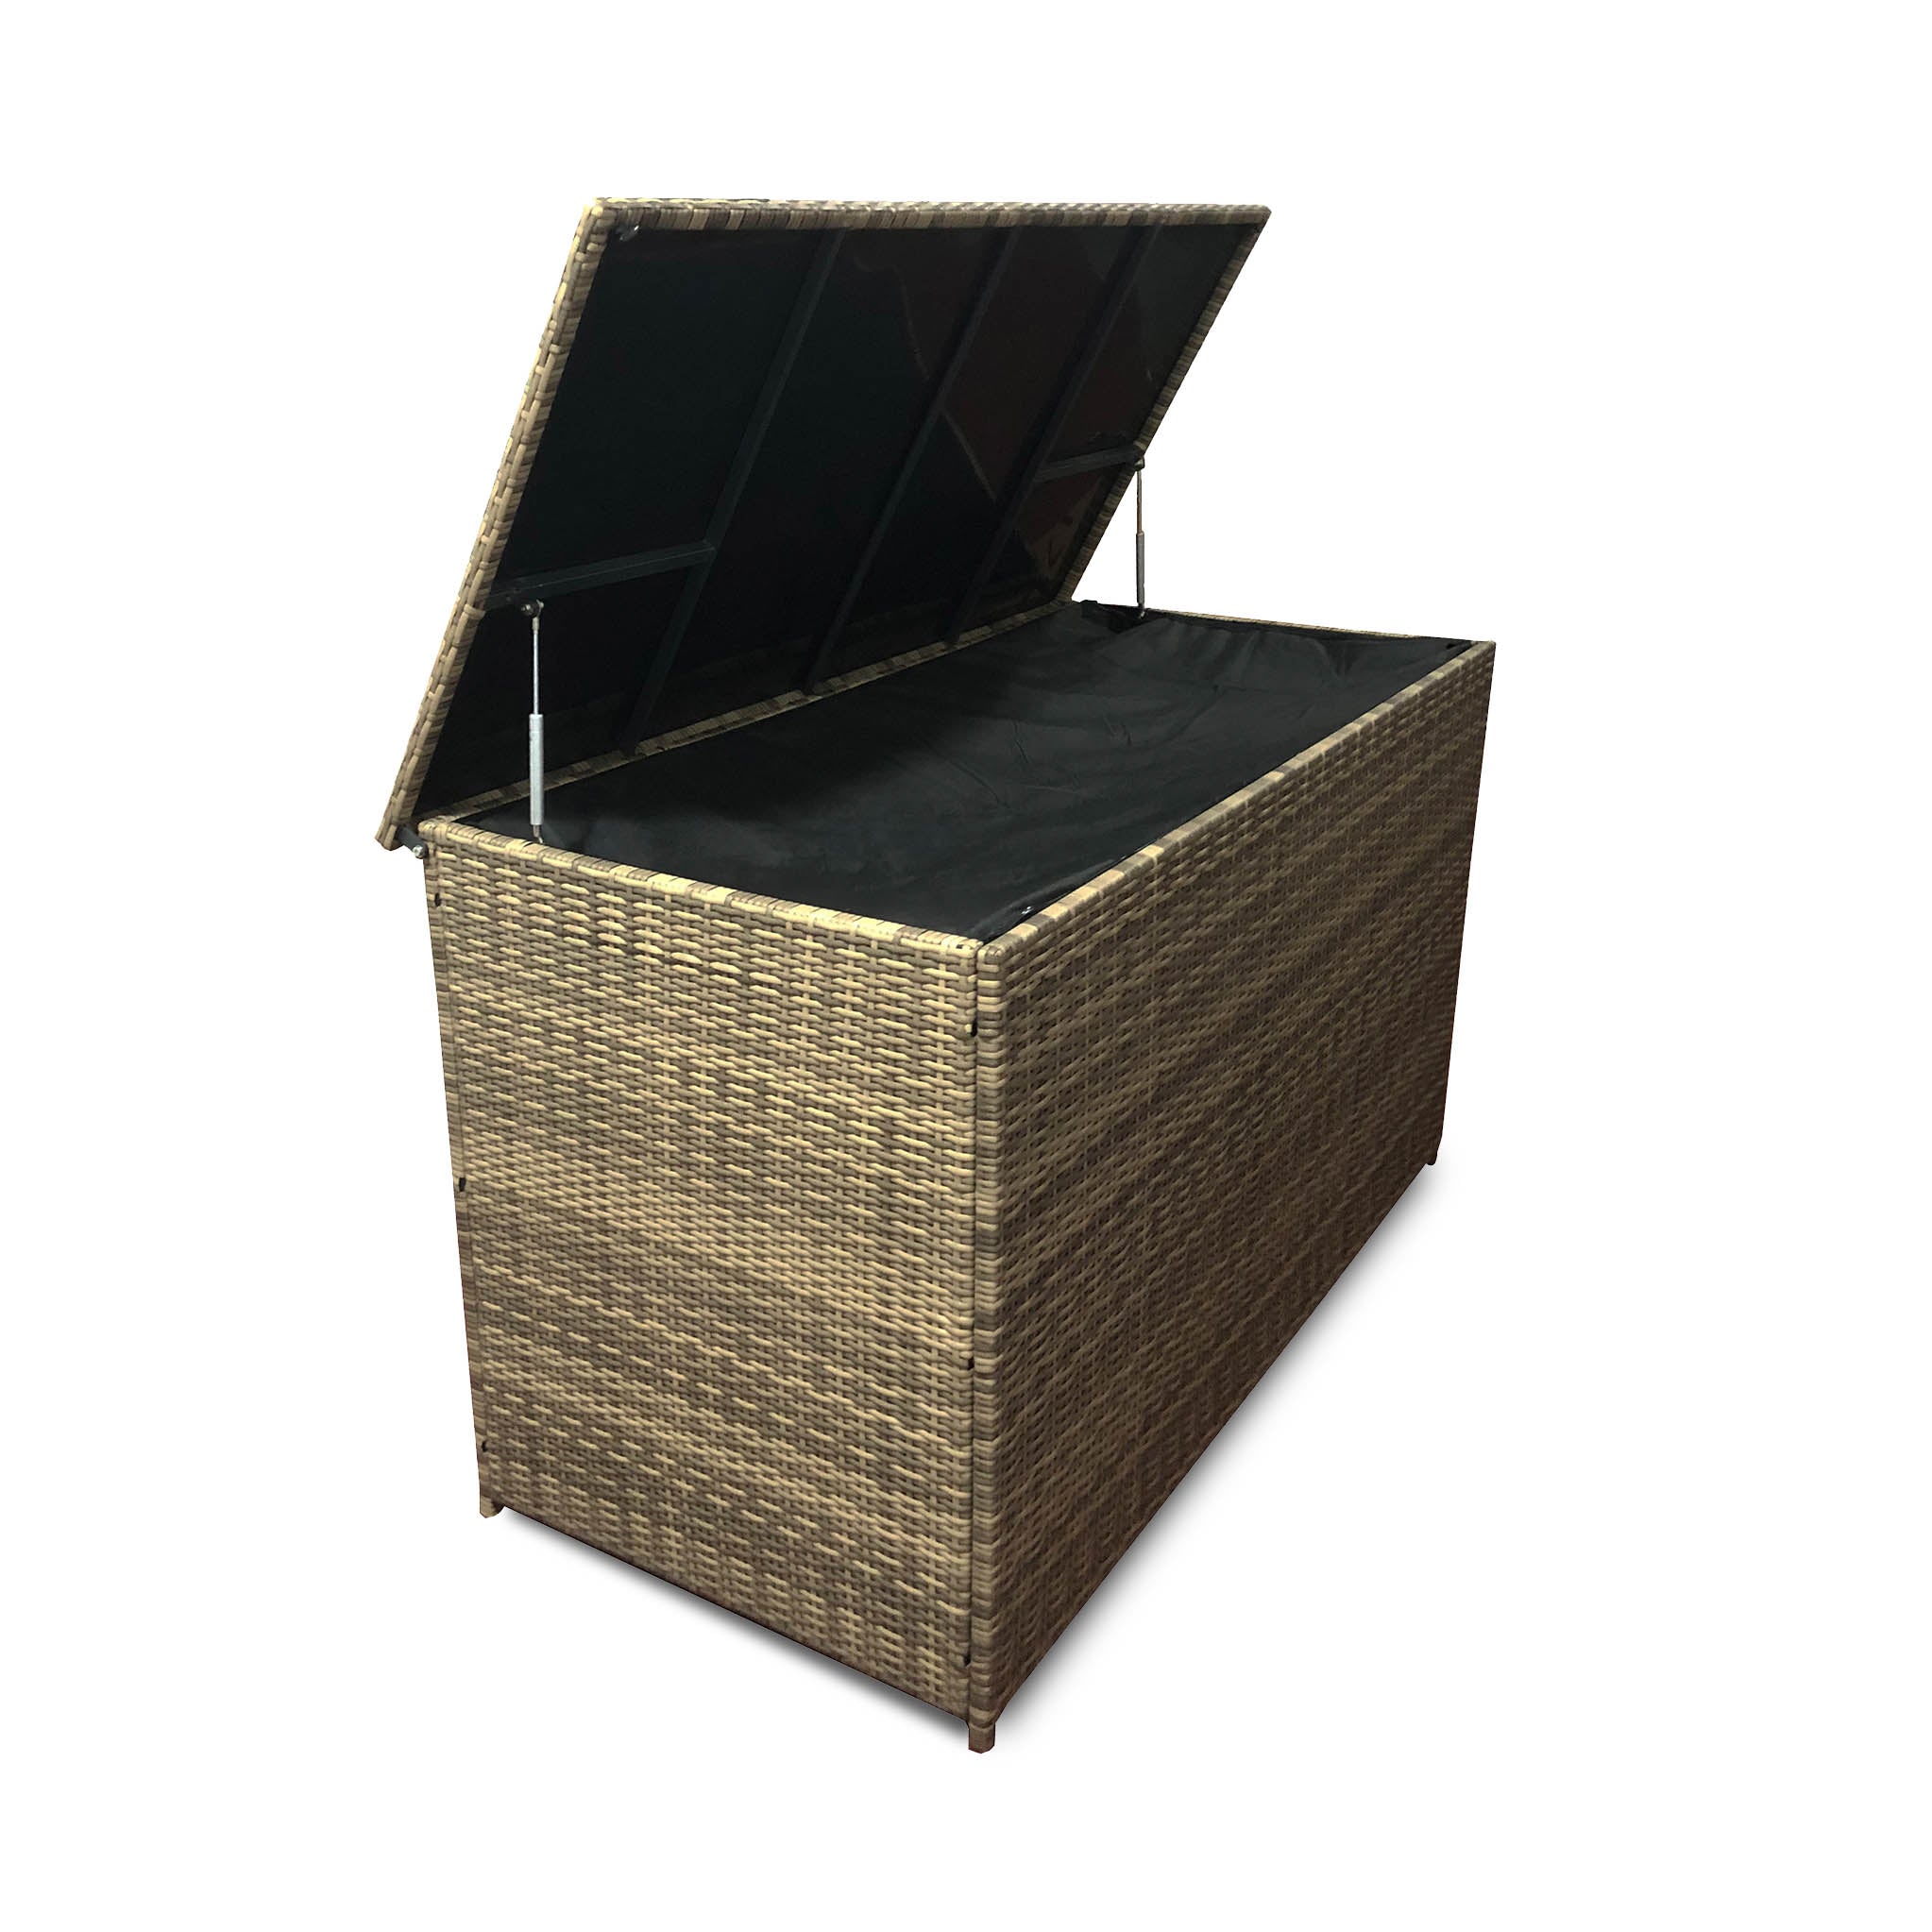 Extra Large Rattan 1100l Outdoor Garden Cushion Storage Box With Waterproof Lining With Lid